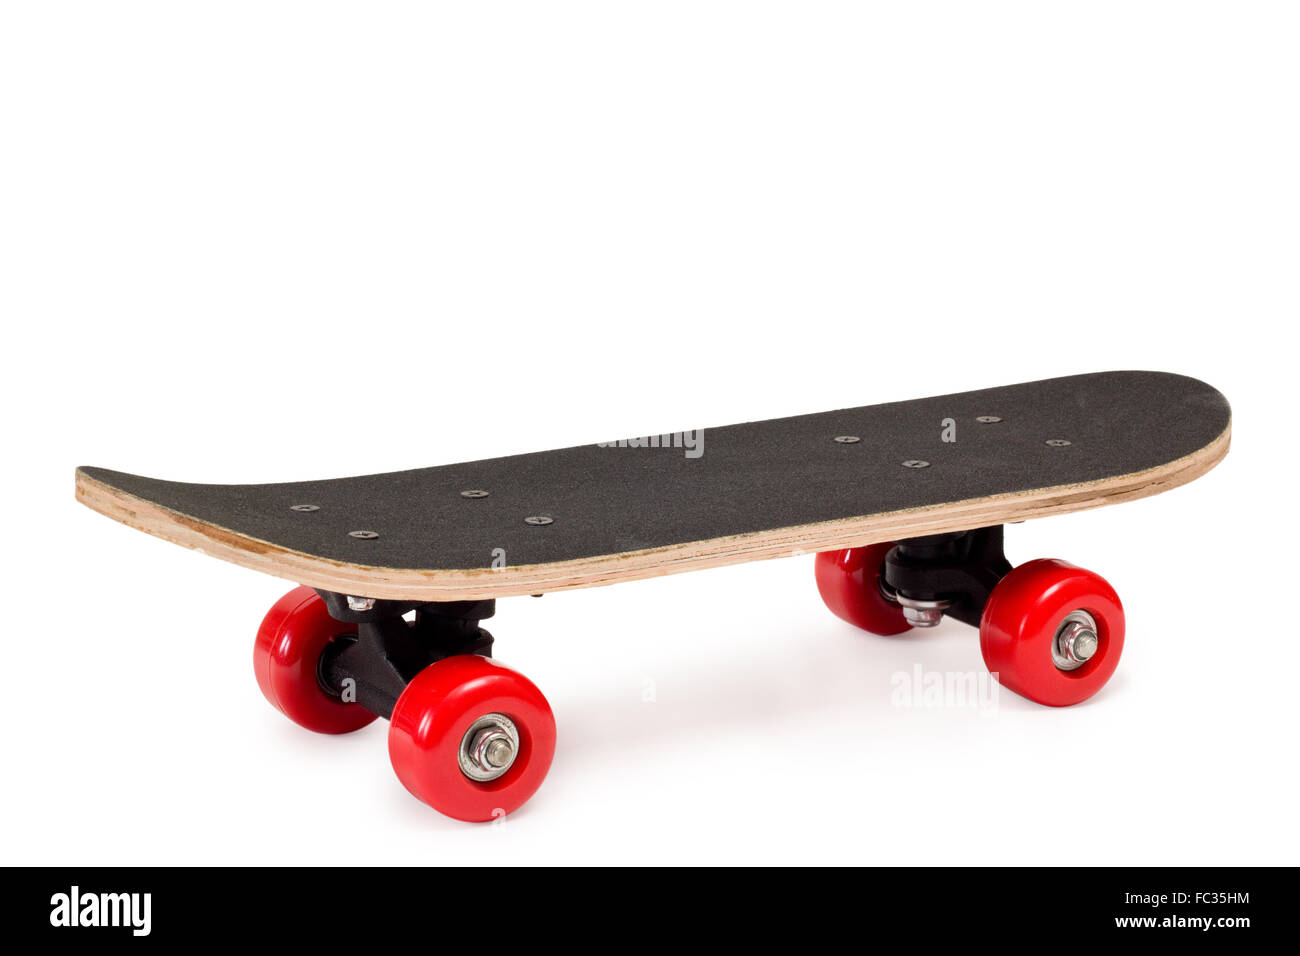 Skateboard Fahren High Resolution Stock Photography and Images - Alamy